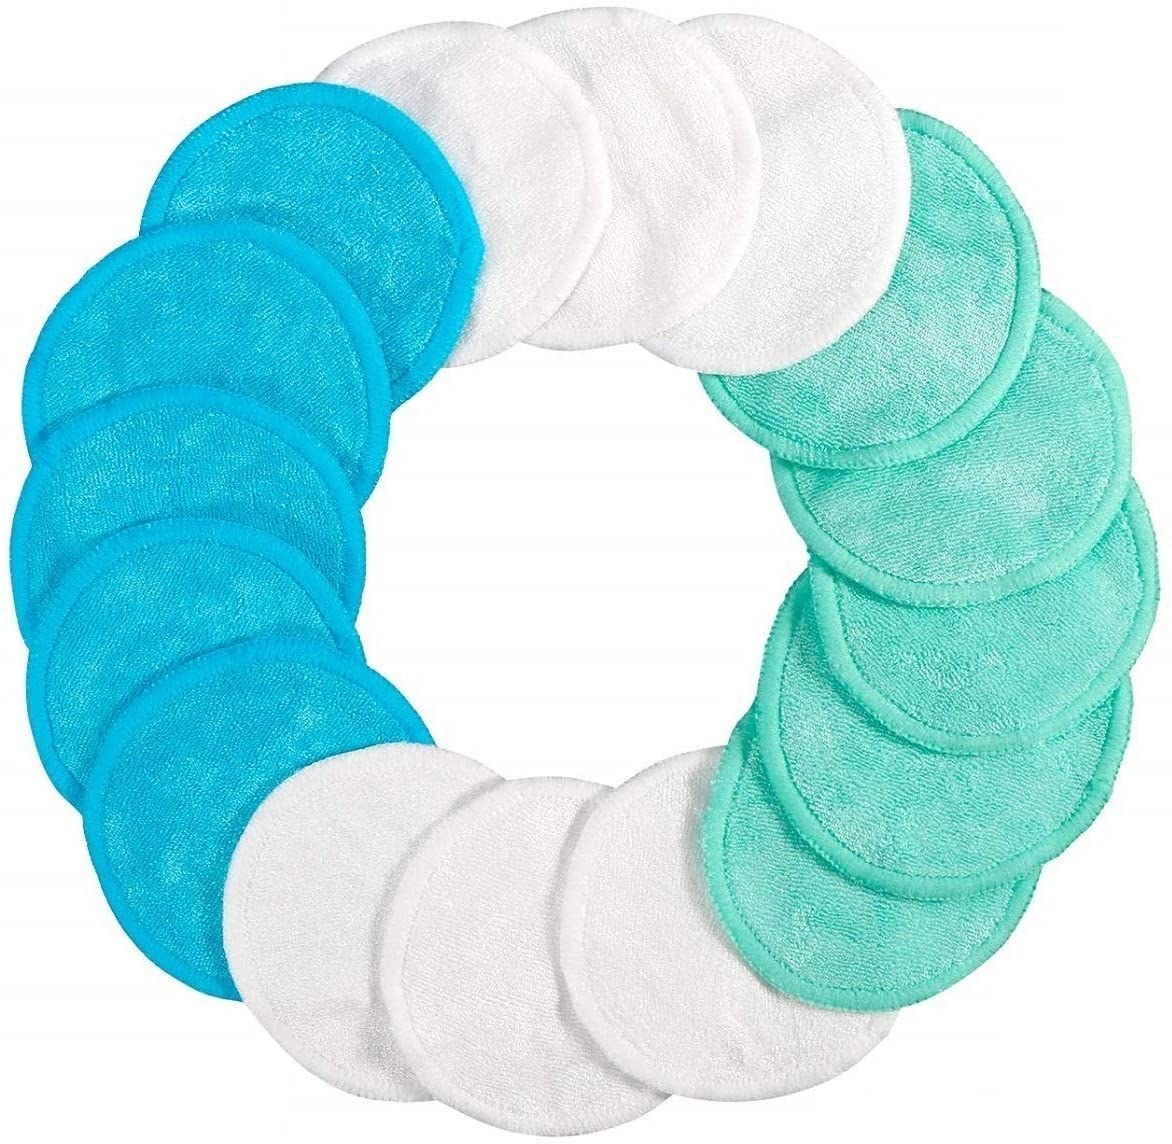 A circle of reusable cosmetic pads